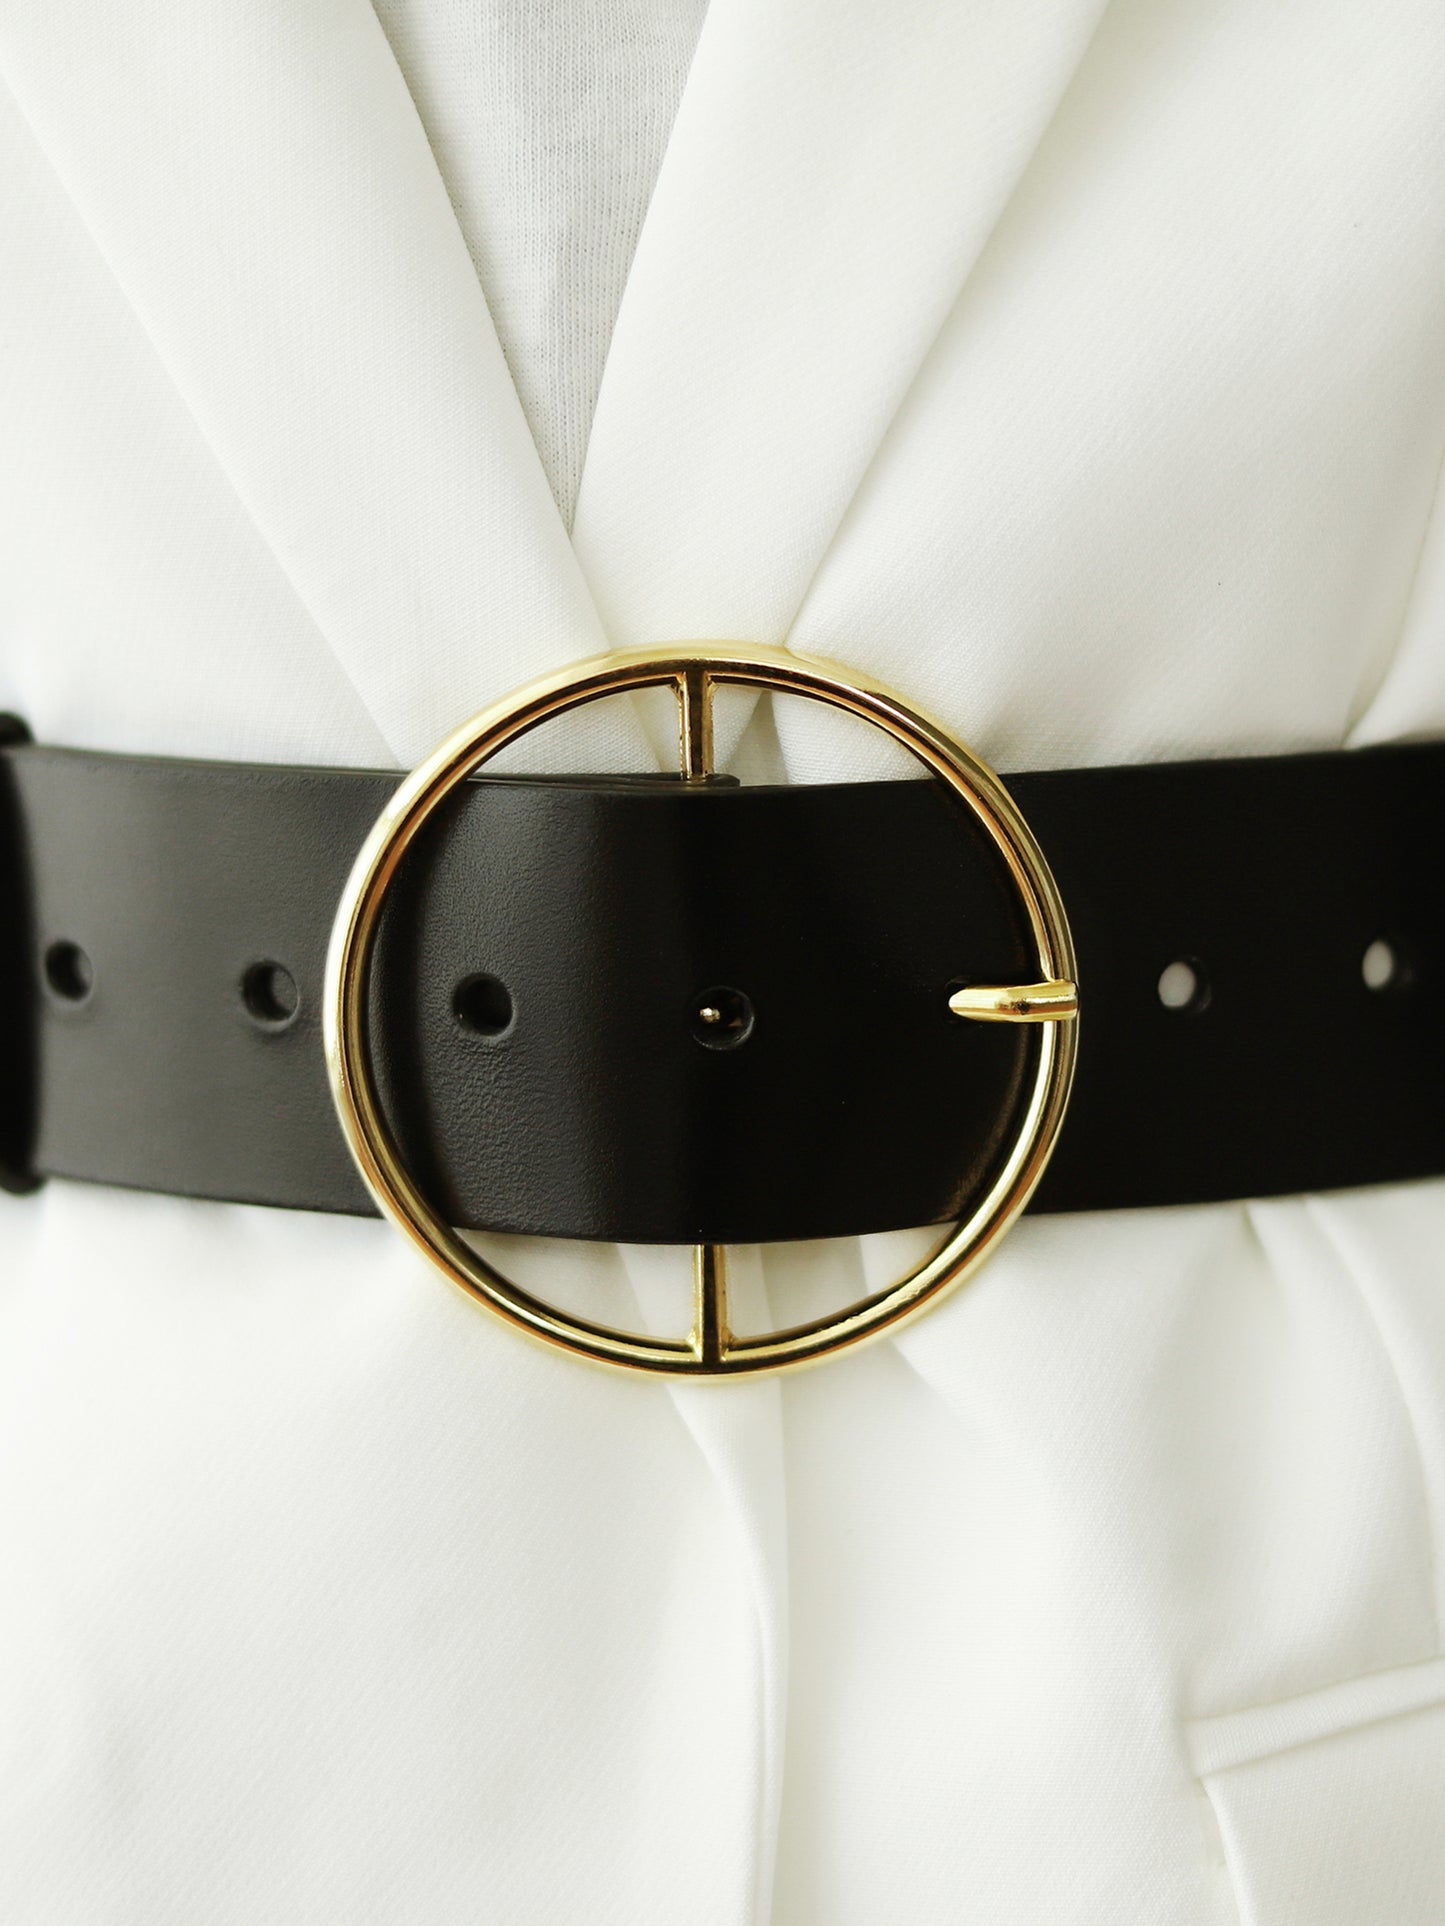 Detailed view of round buckle leather belt.